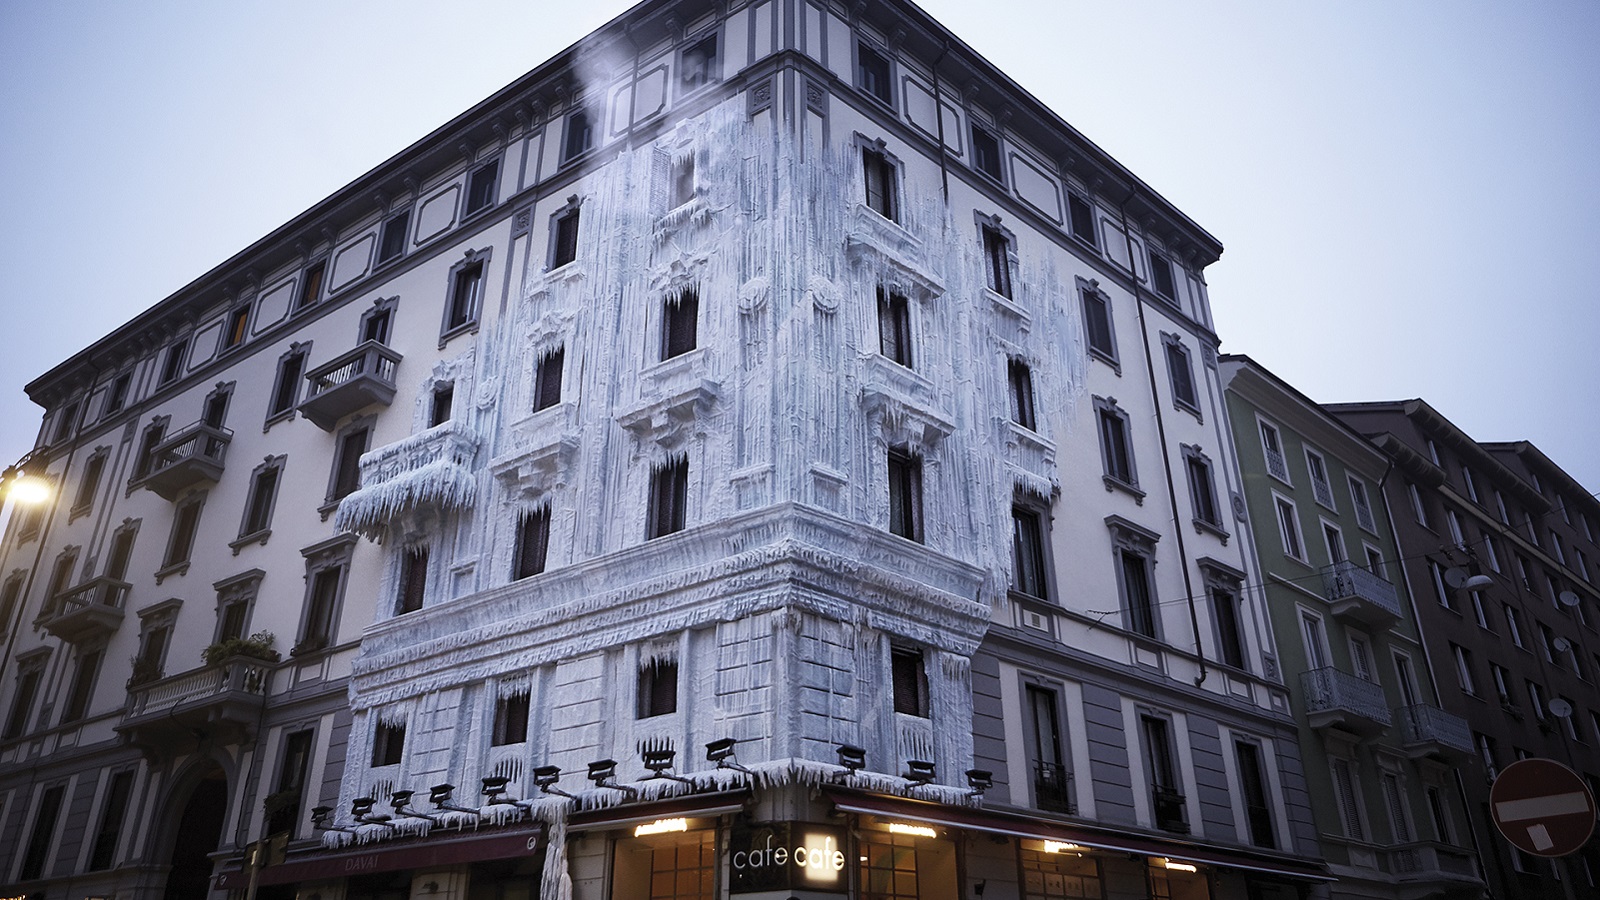 E.ON Italy Freezes Historic Milan Building to Highlight Energy Waste